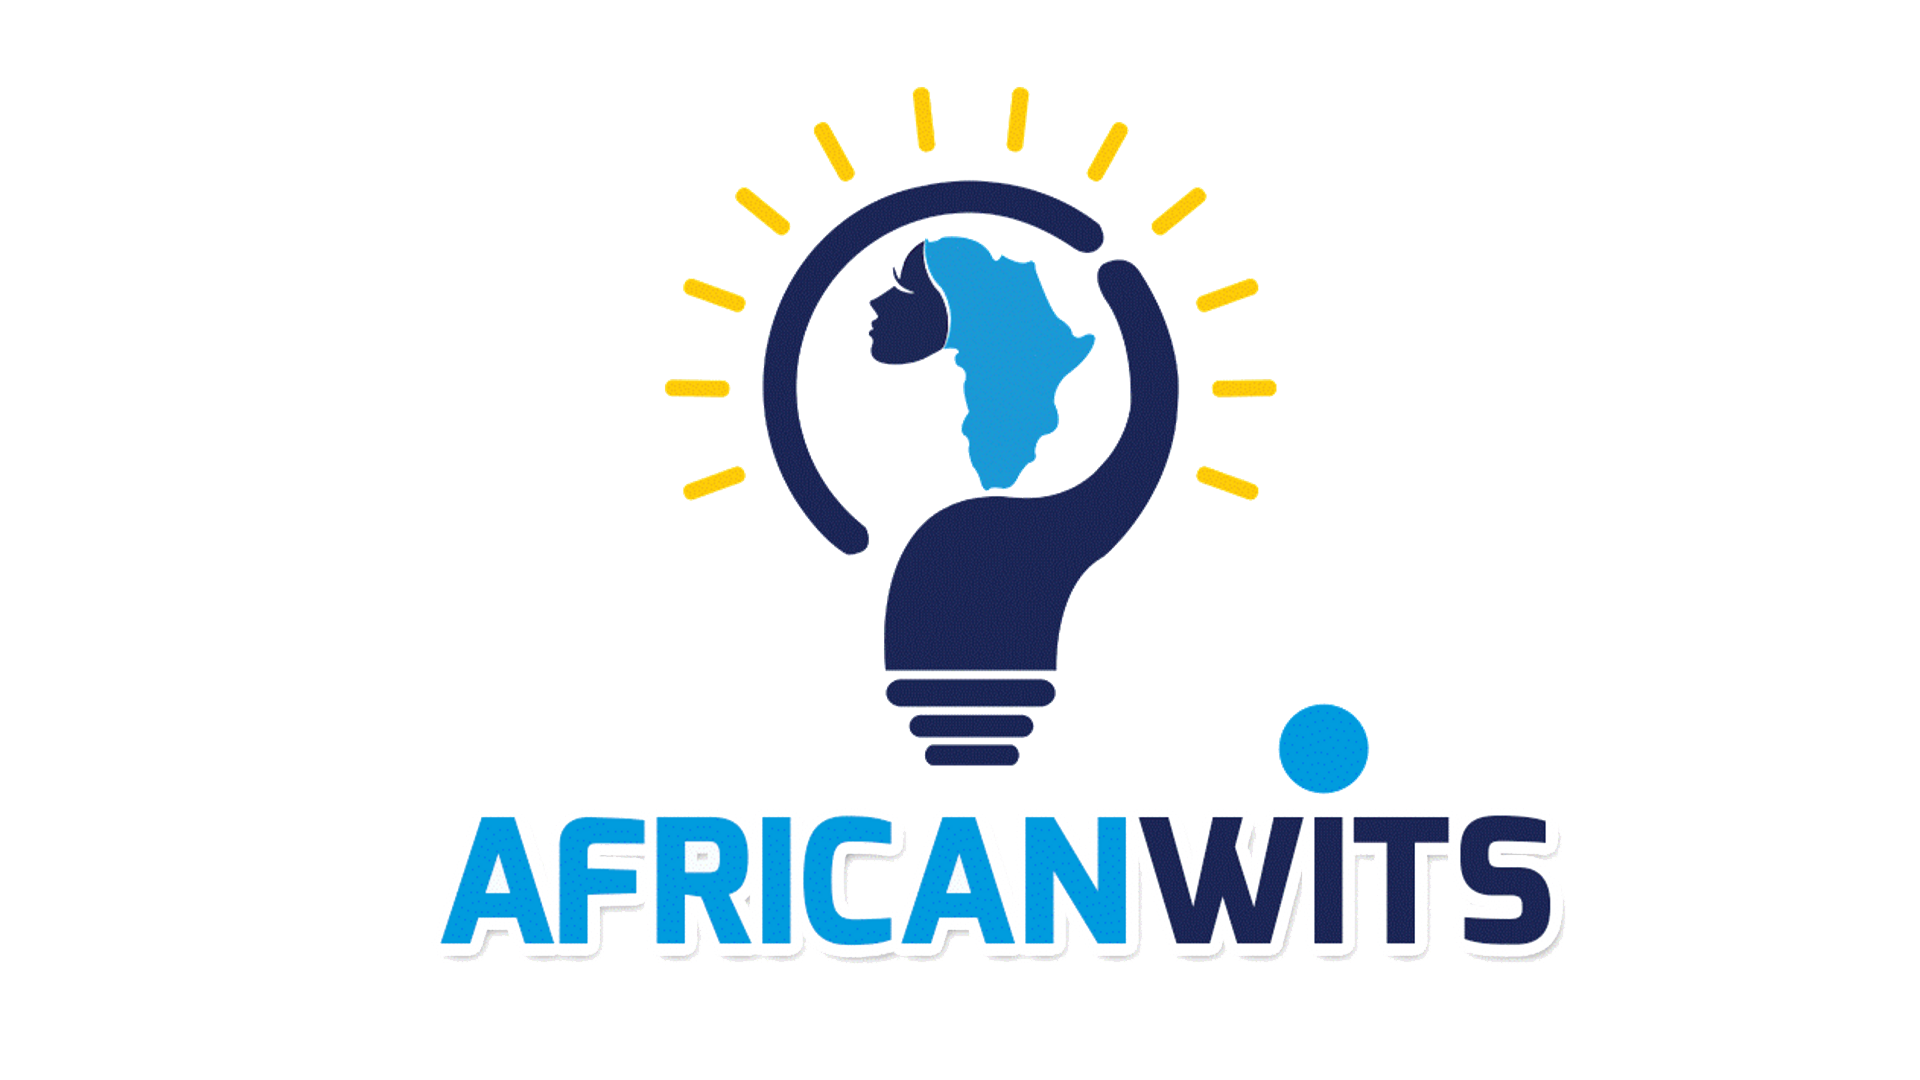 Africanwits